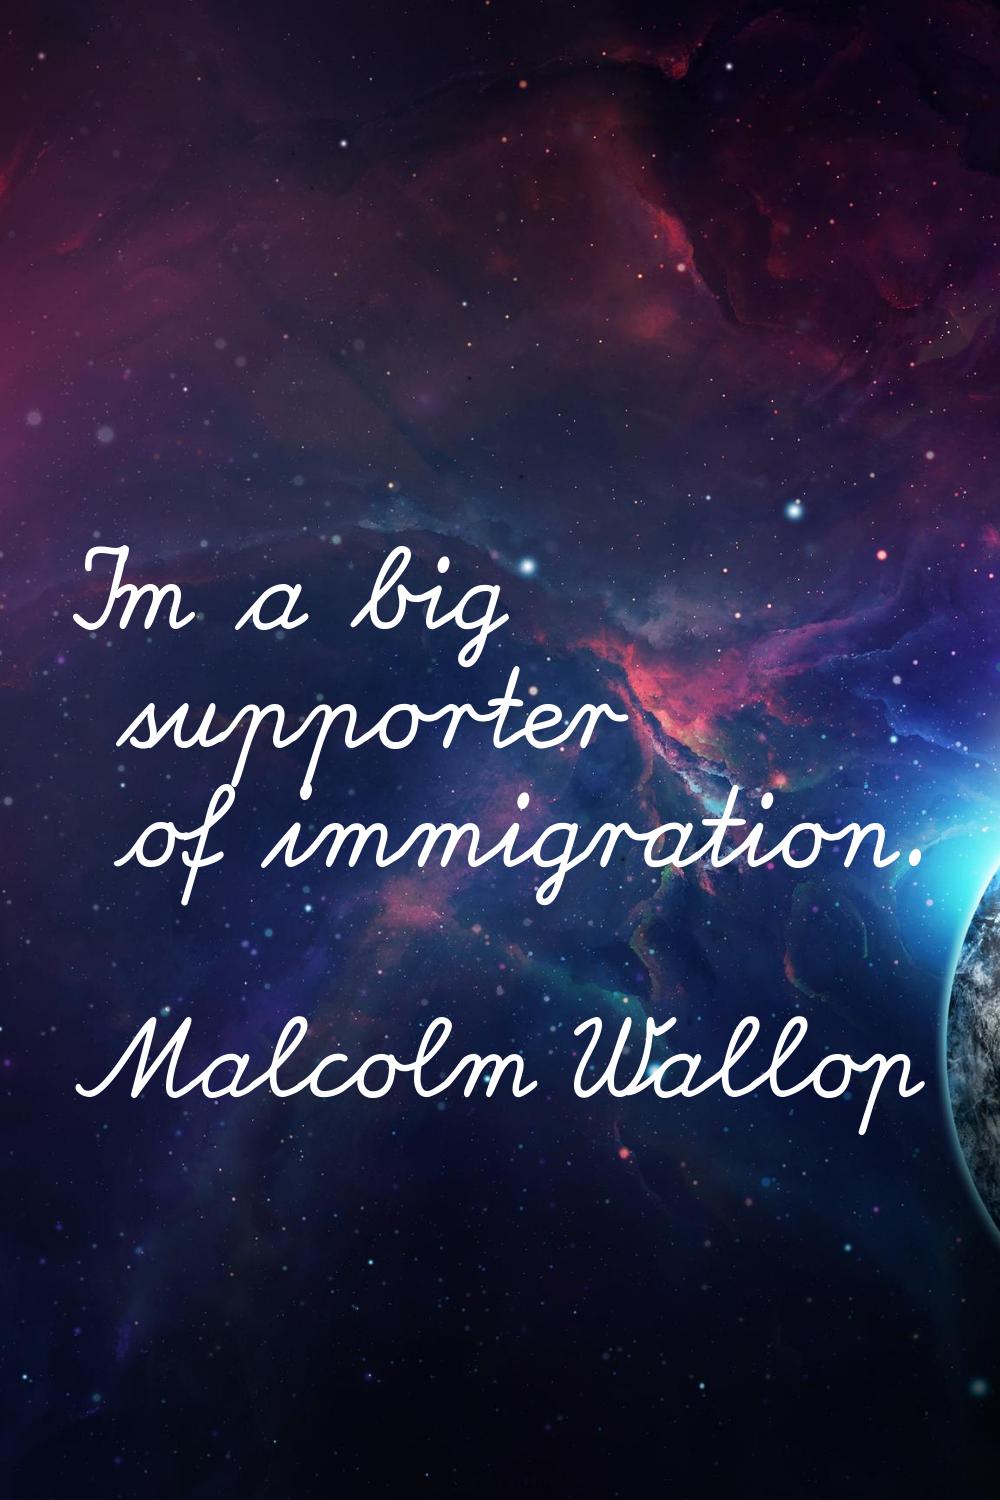 I'm a big supporter of immigration.